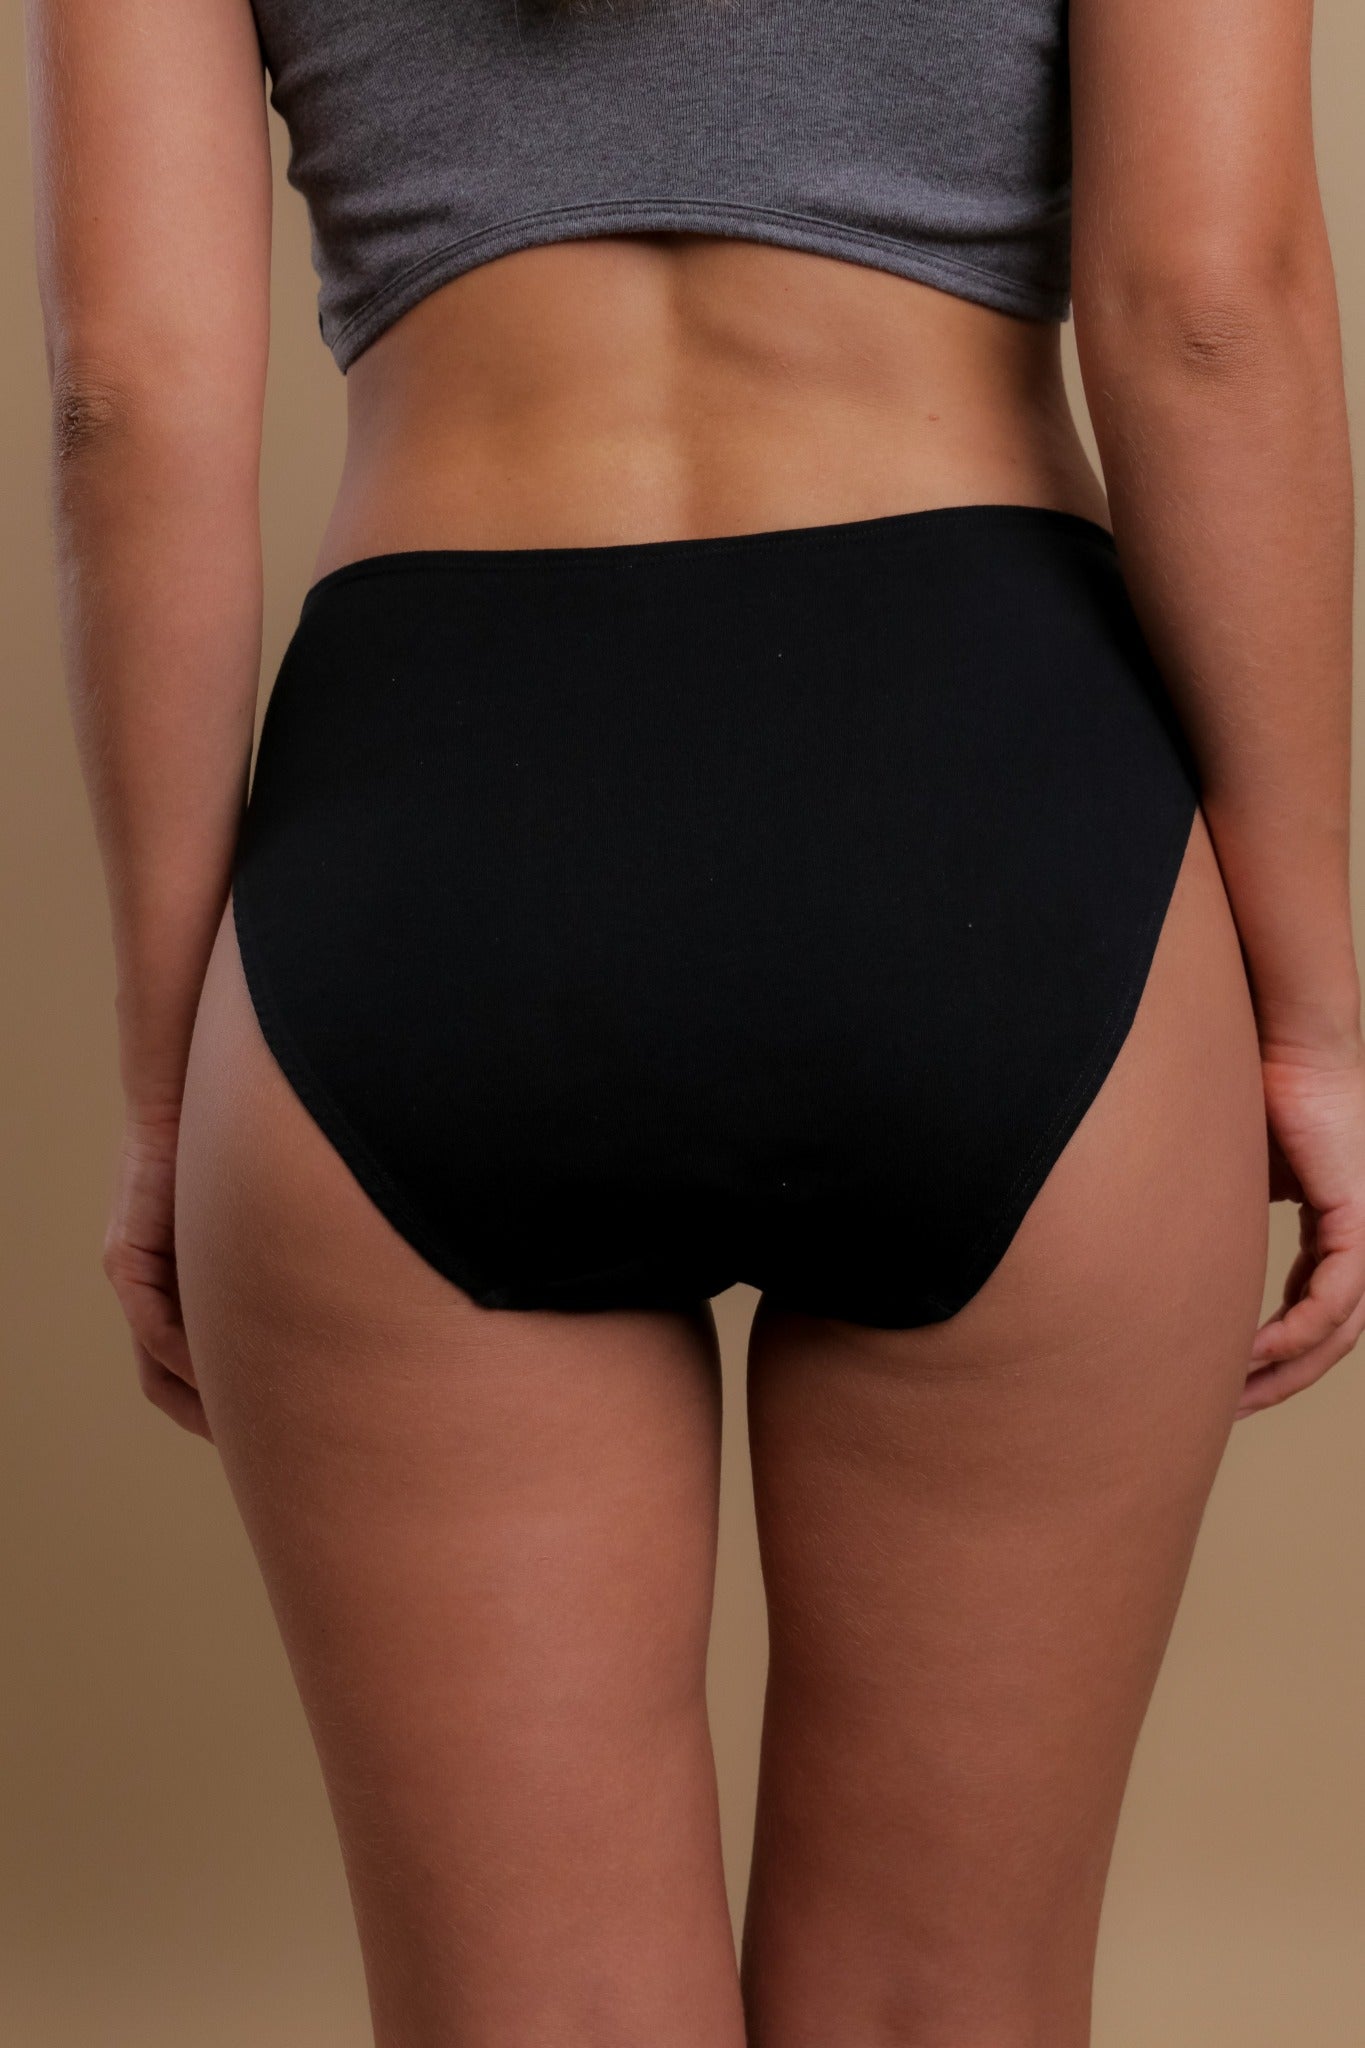 Allergy-free Women's Low-rise Contoured Brief ( 2/pack